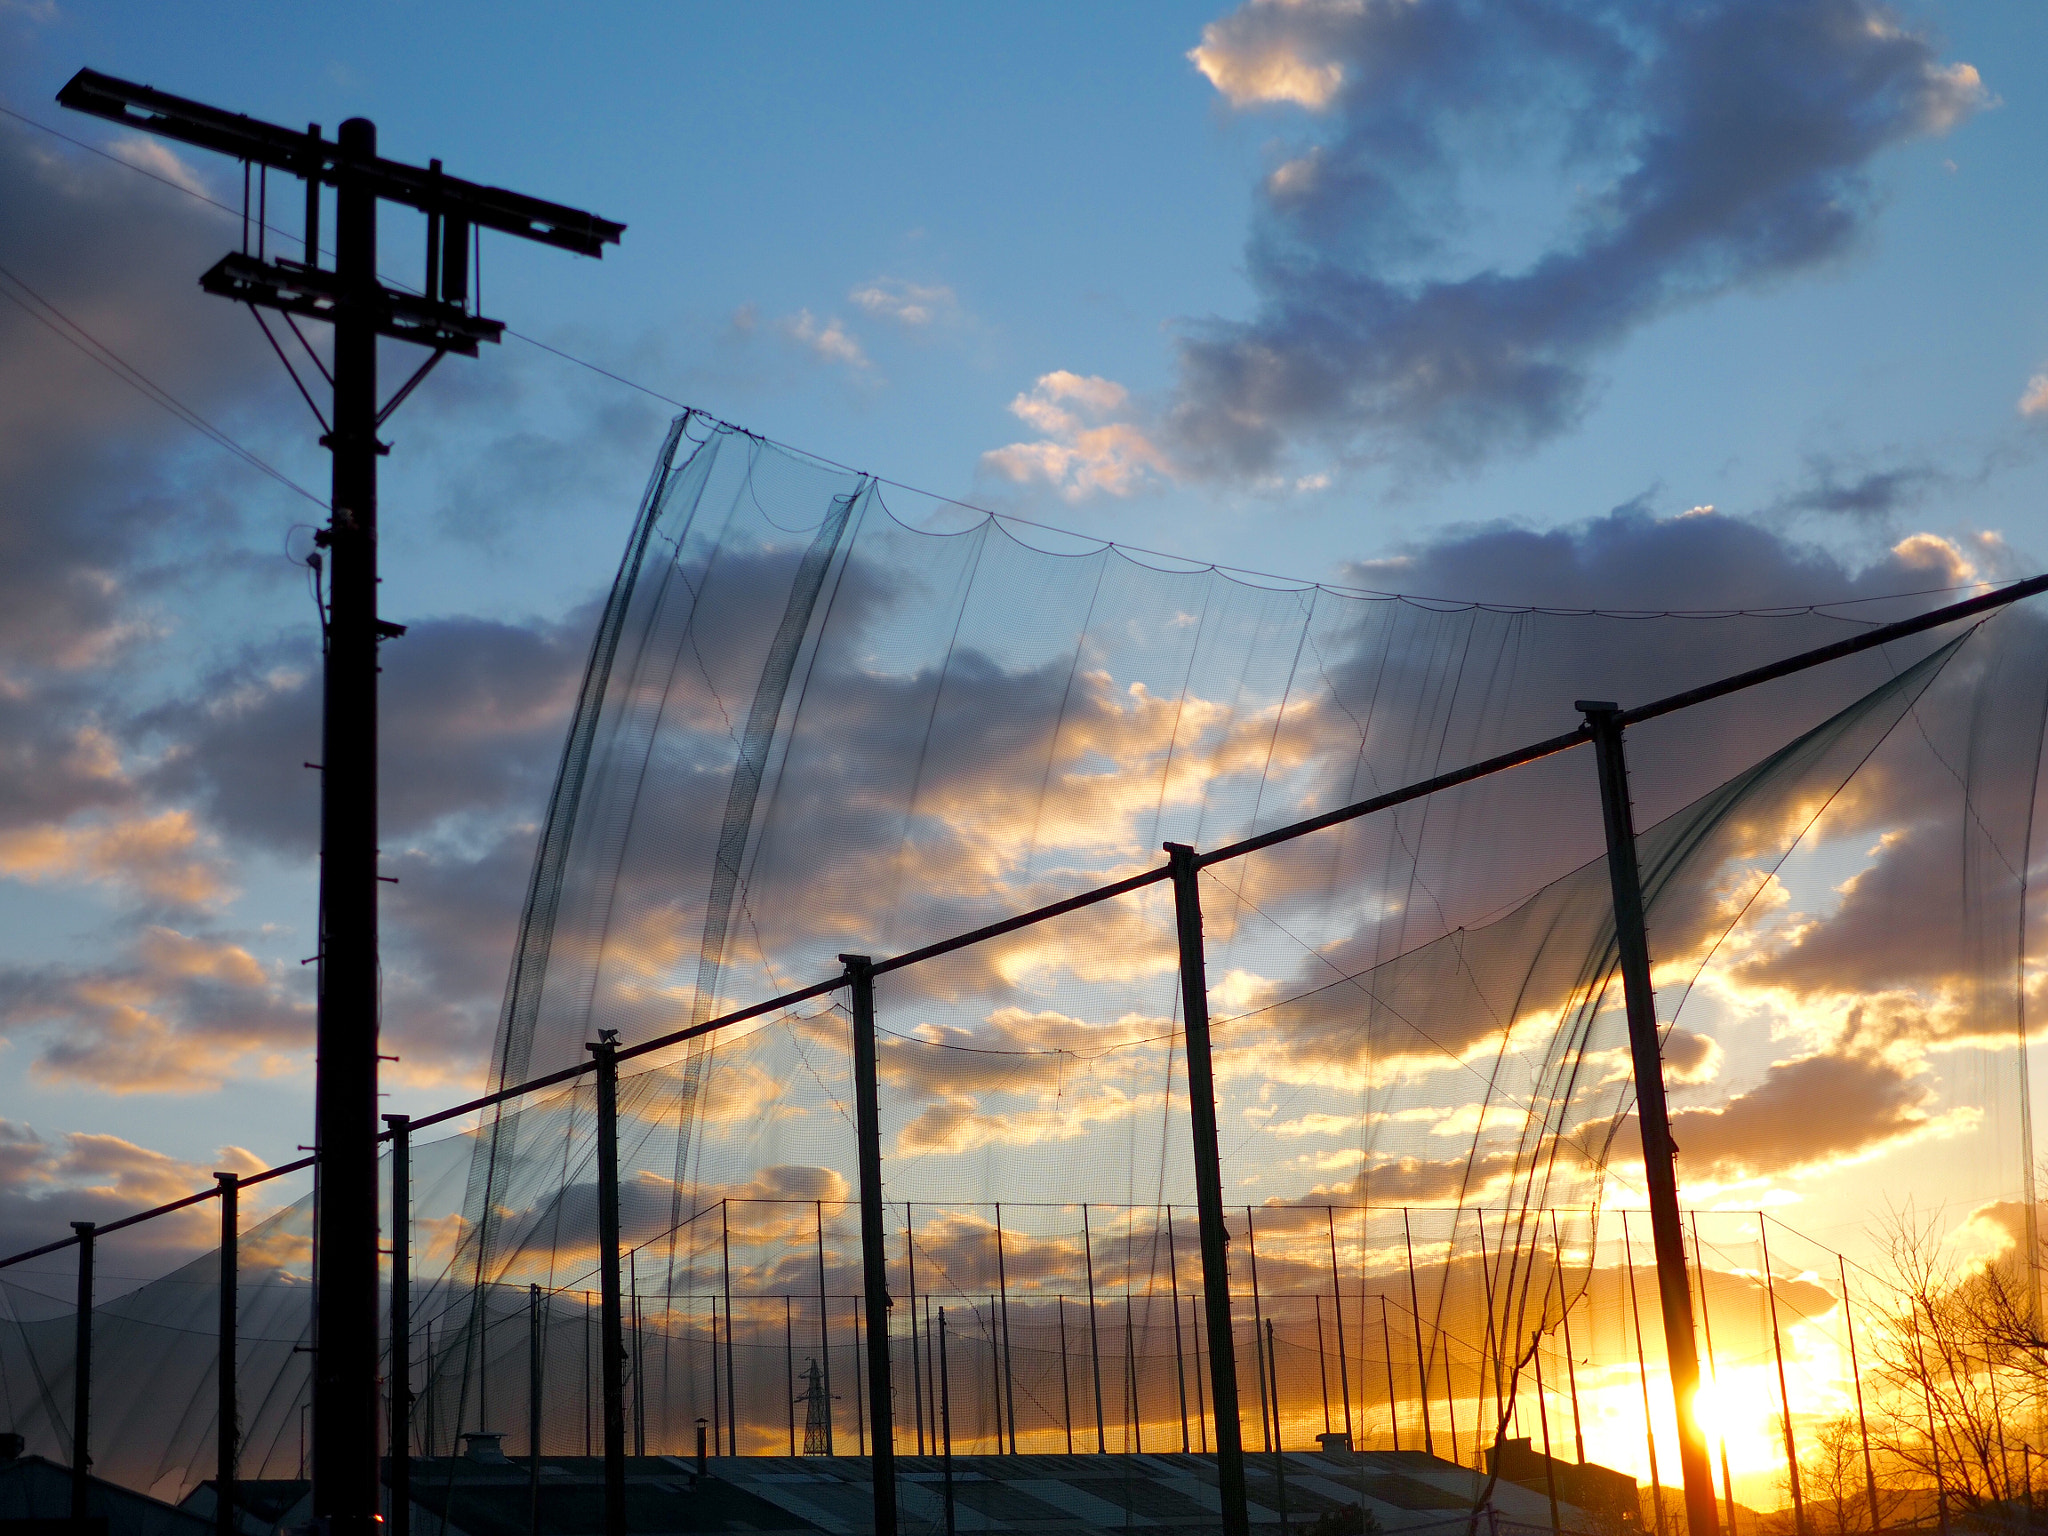 Olympus OM-D E-M5 II sample photo. Sunset at the driving range photography